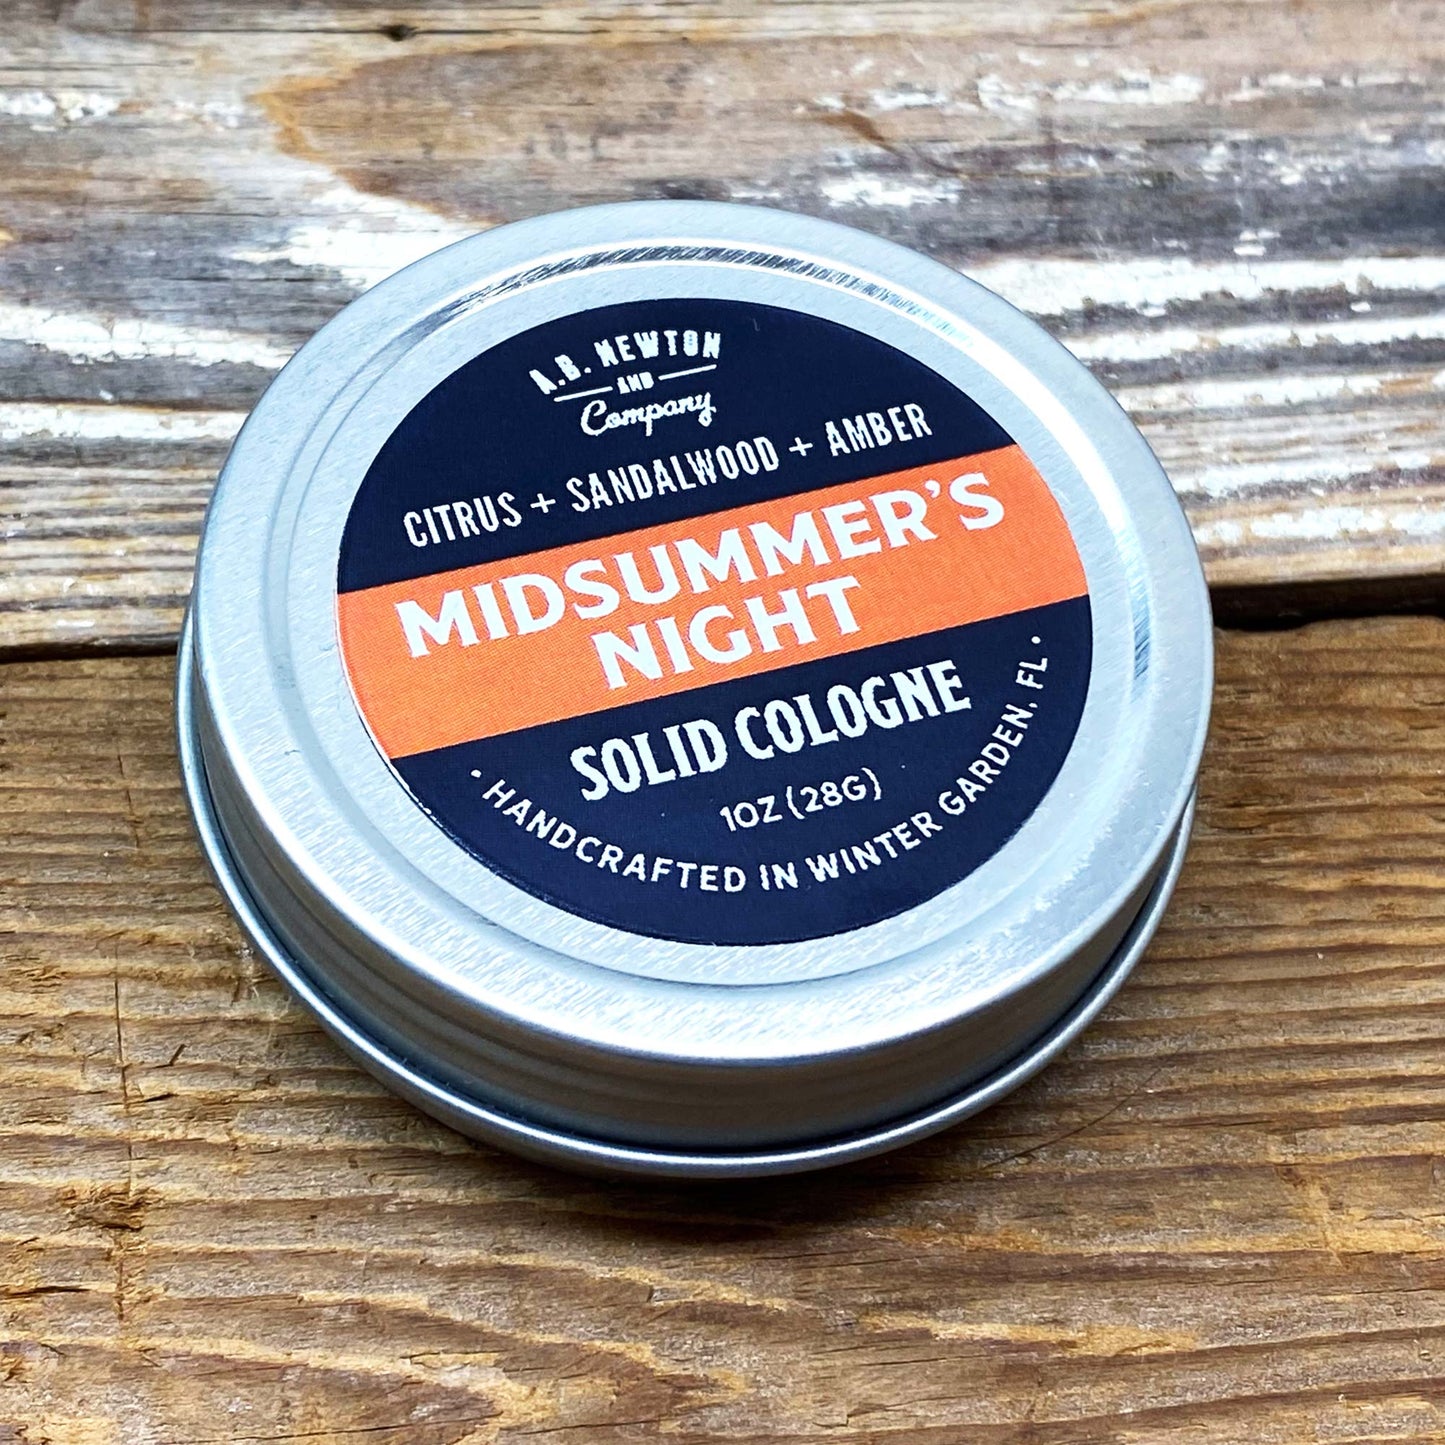 Midsummer's Night Handcrafted All Natural Solid Cologne 1oz